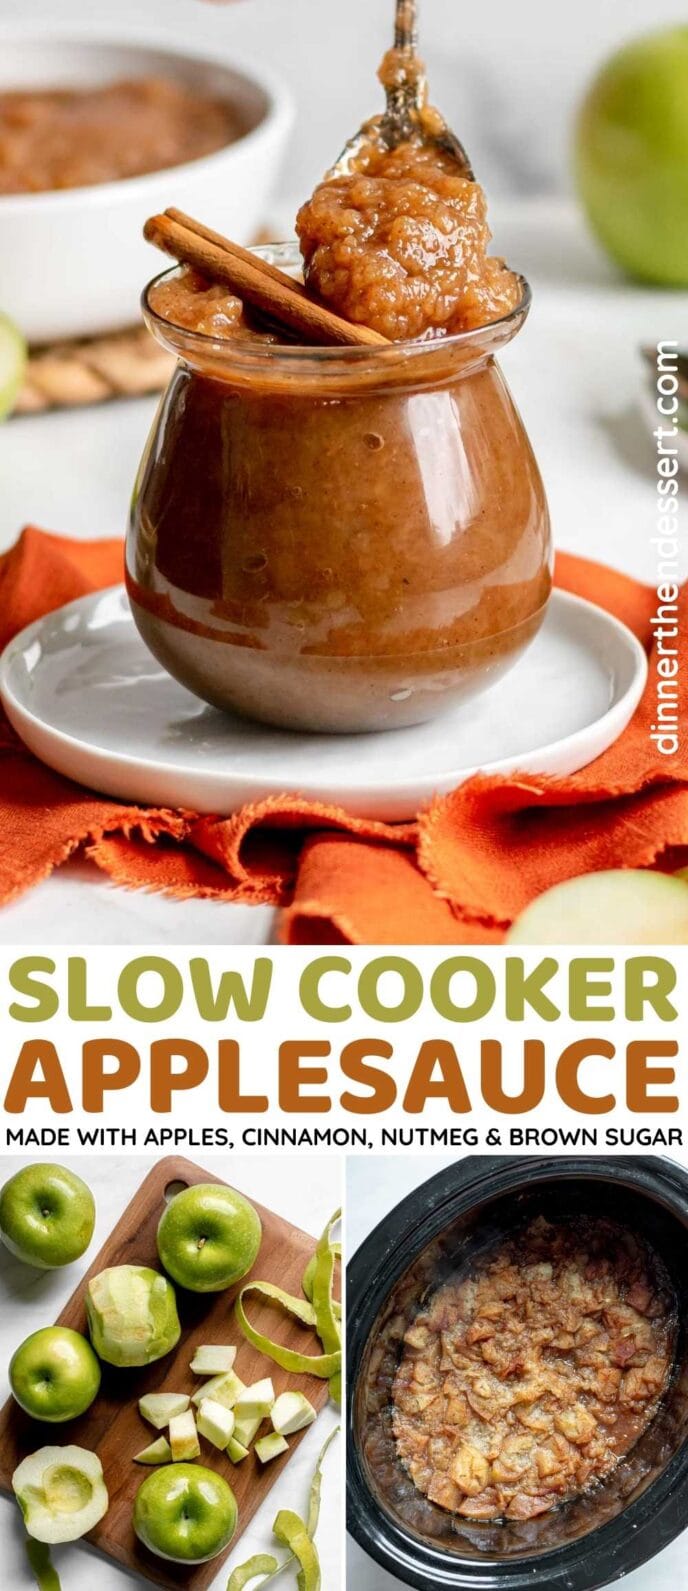 Slow Cooker Applesauce Collage